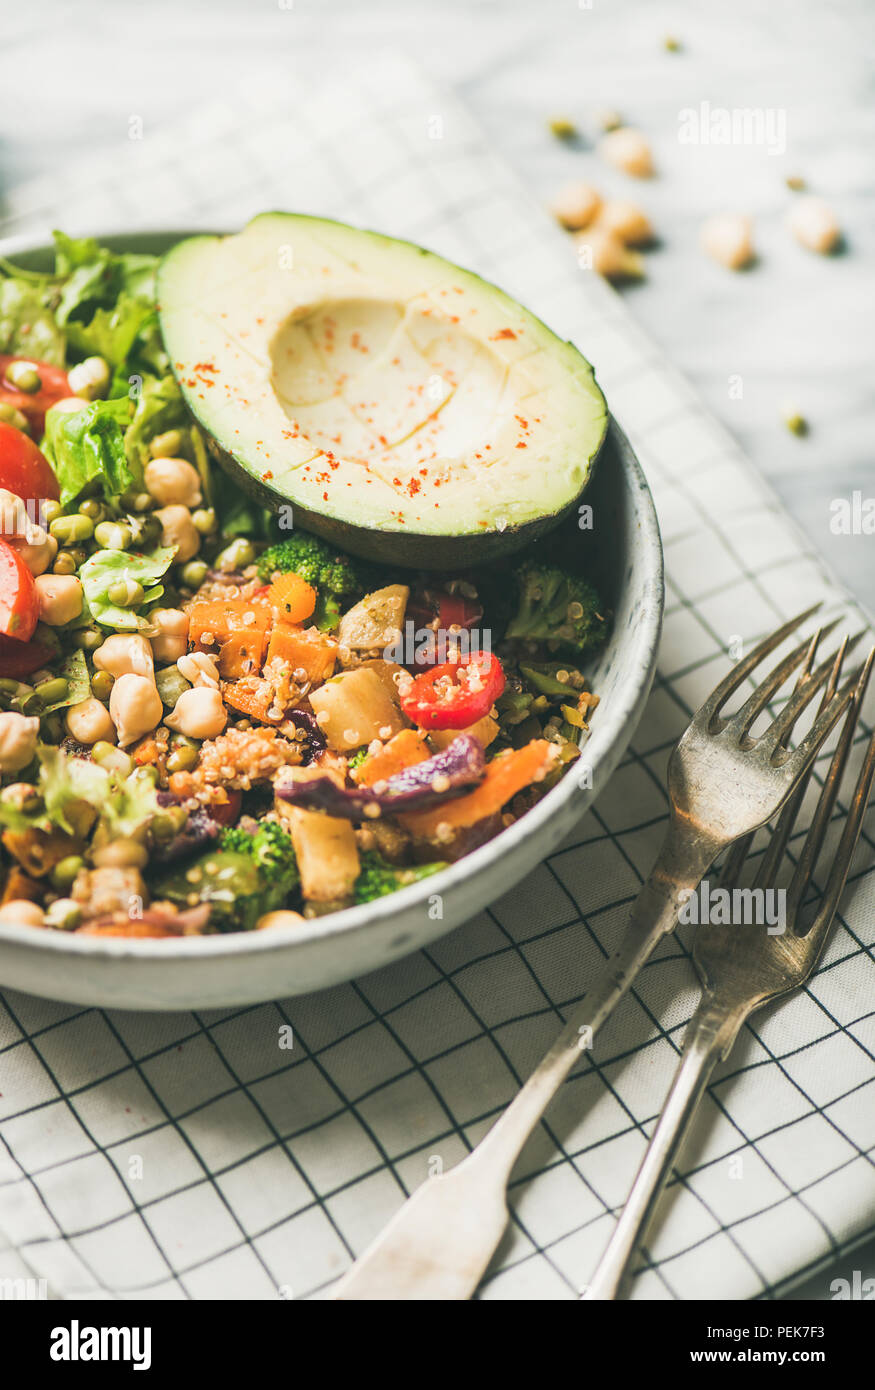 Vegan dinner with avocado, grains, beans and vegetables Stock Photo